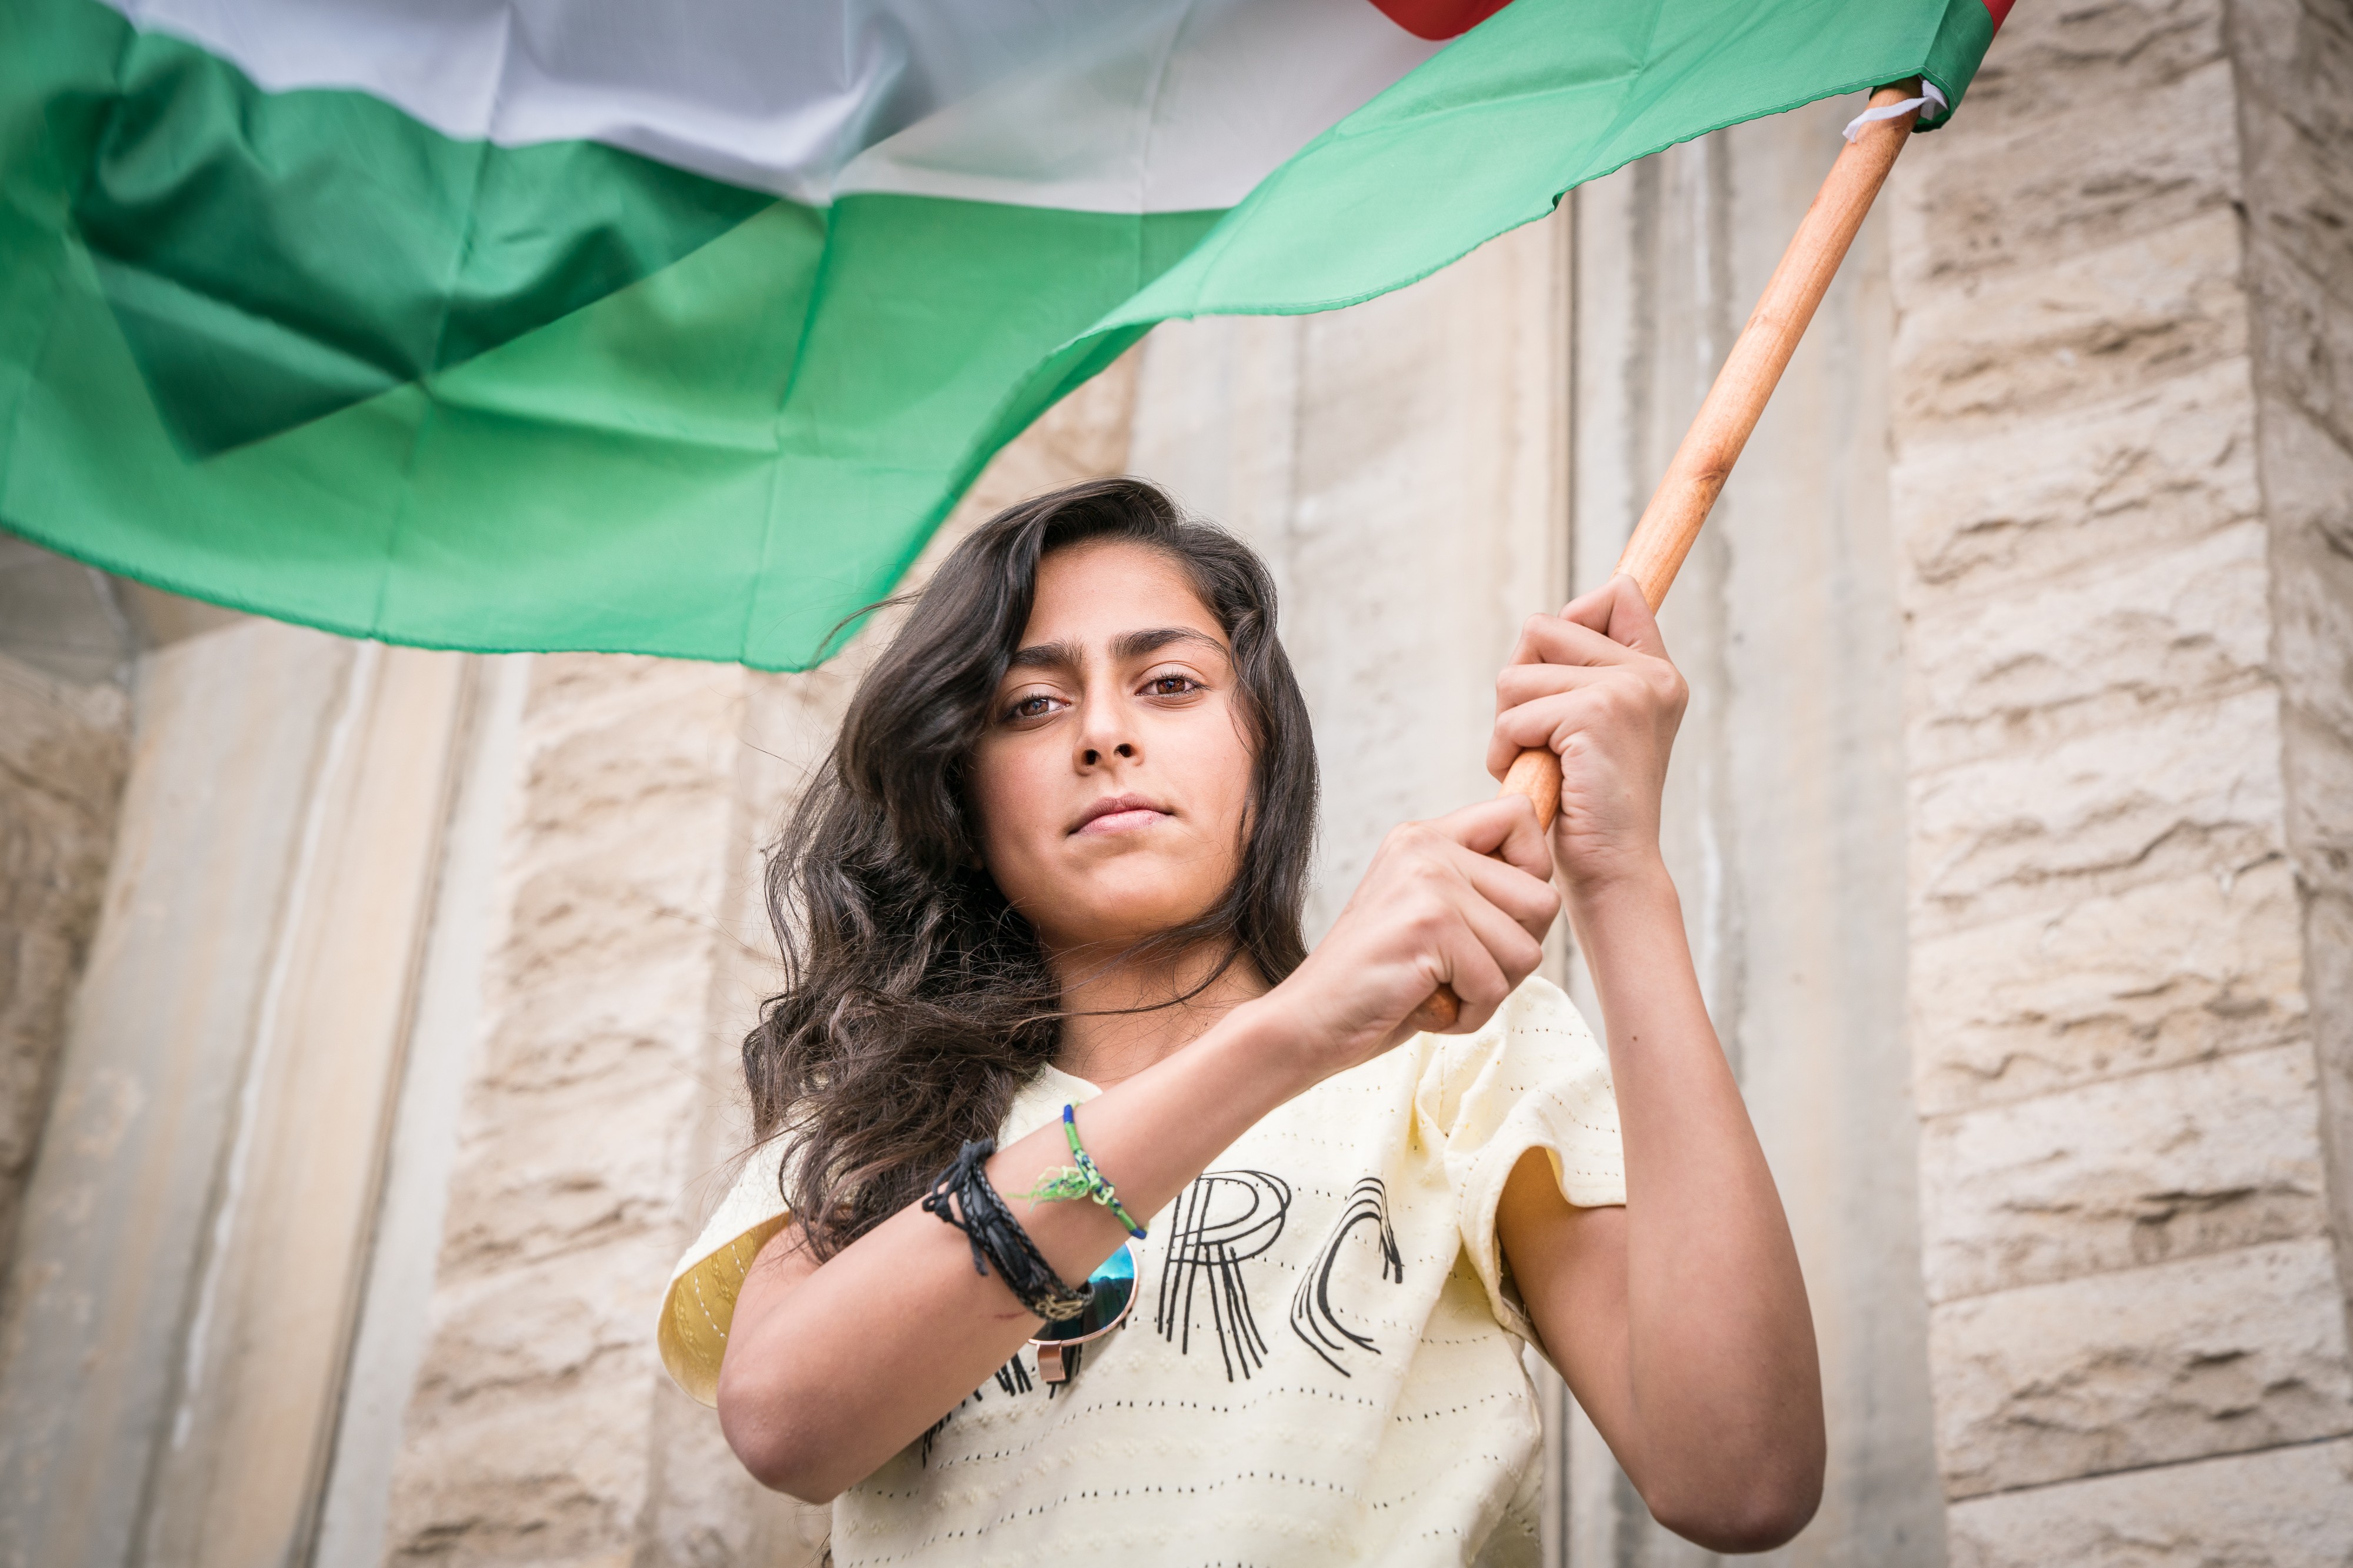 Palestinian girl with Palestinian flag